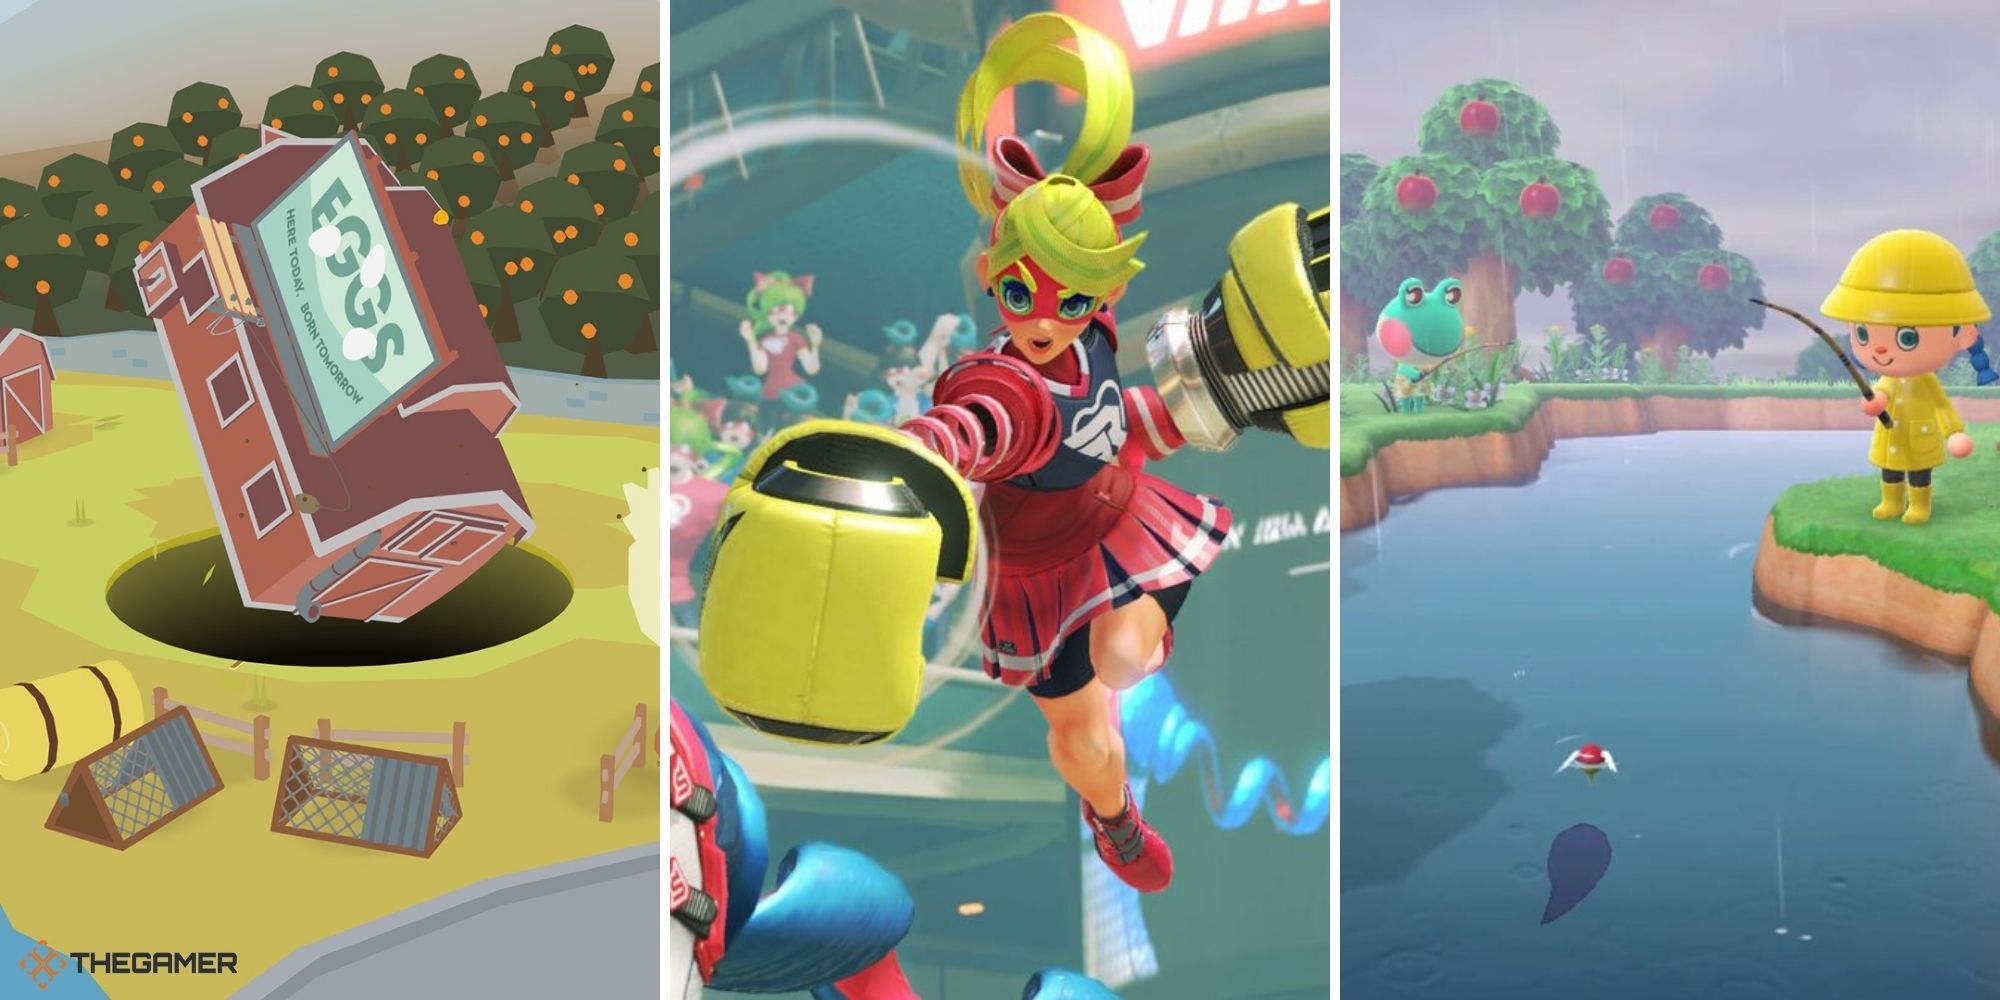 Promo action scenes from video games - (left to right) Donut Count, ARMS, Animal Crossing New Horizons